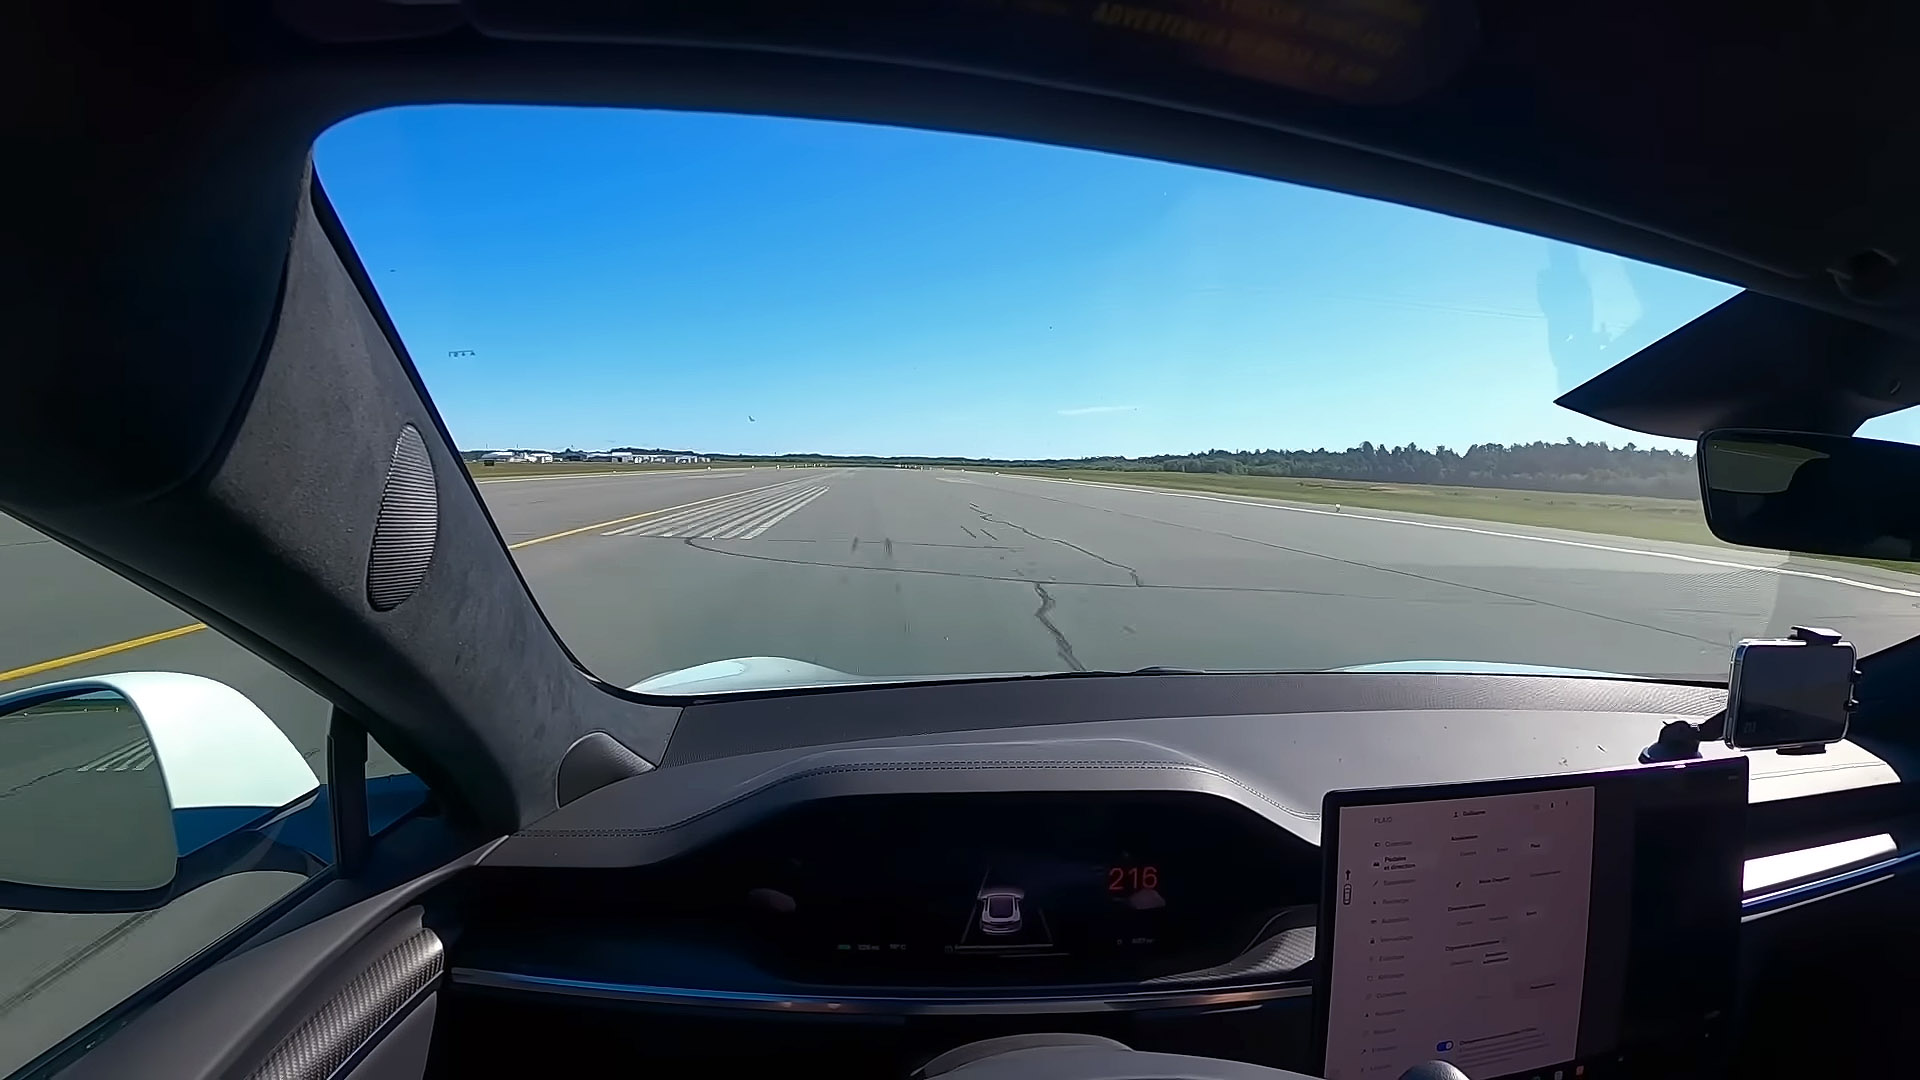 Chip-tuned Tesla Model S Plaid hits record 216 mph top speed surpassing its  own specs -  News